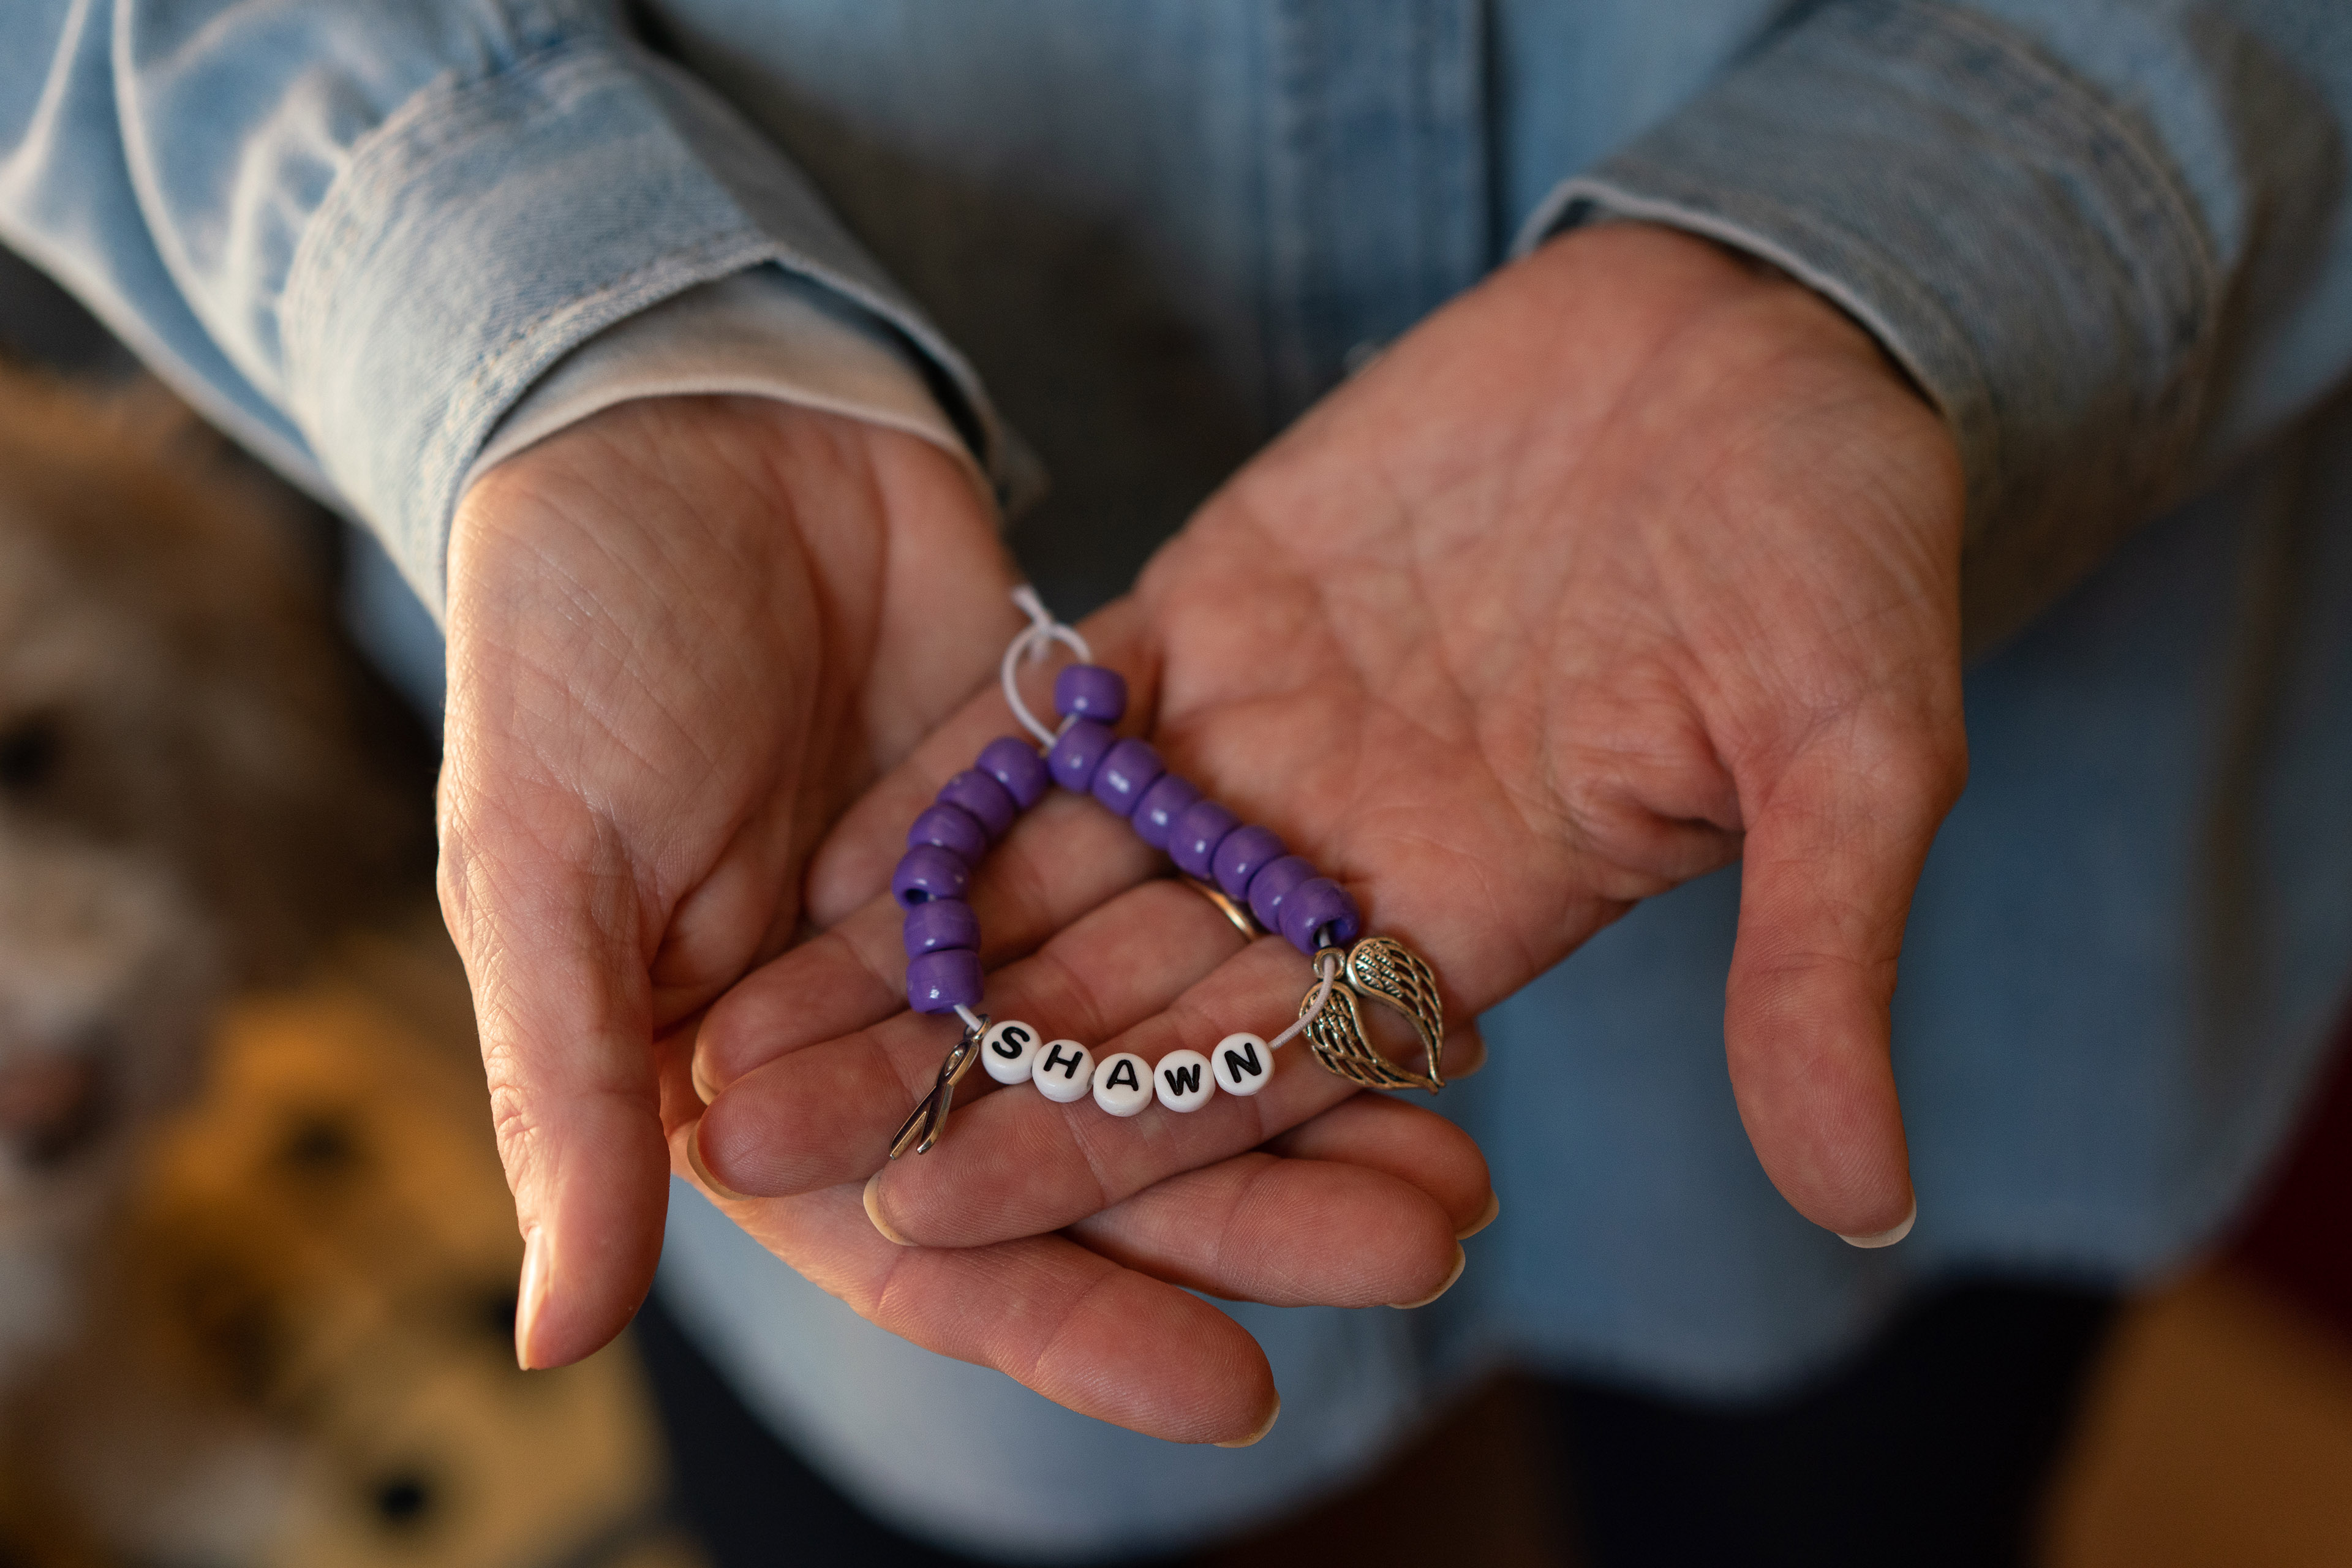 Marianne Sinisi, of Altoona, Pennsylvania, holds in her two hands a purple beaded bracelet with the word "Shawn," in memory of her 26-year-old son, Shawn, whom she lost to an opioid overdose in 2018.